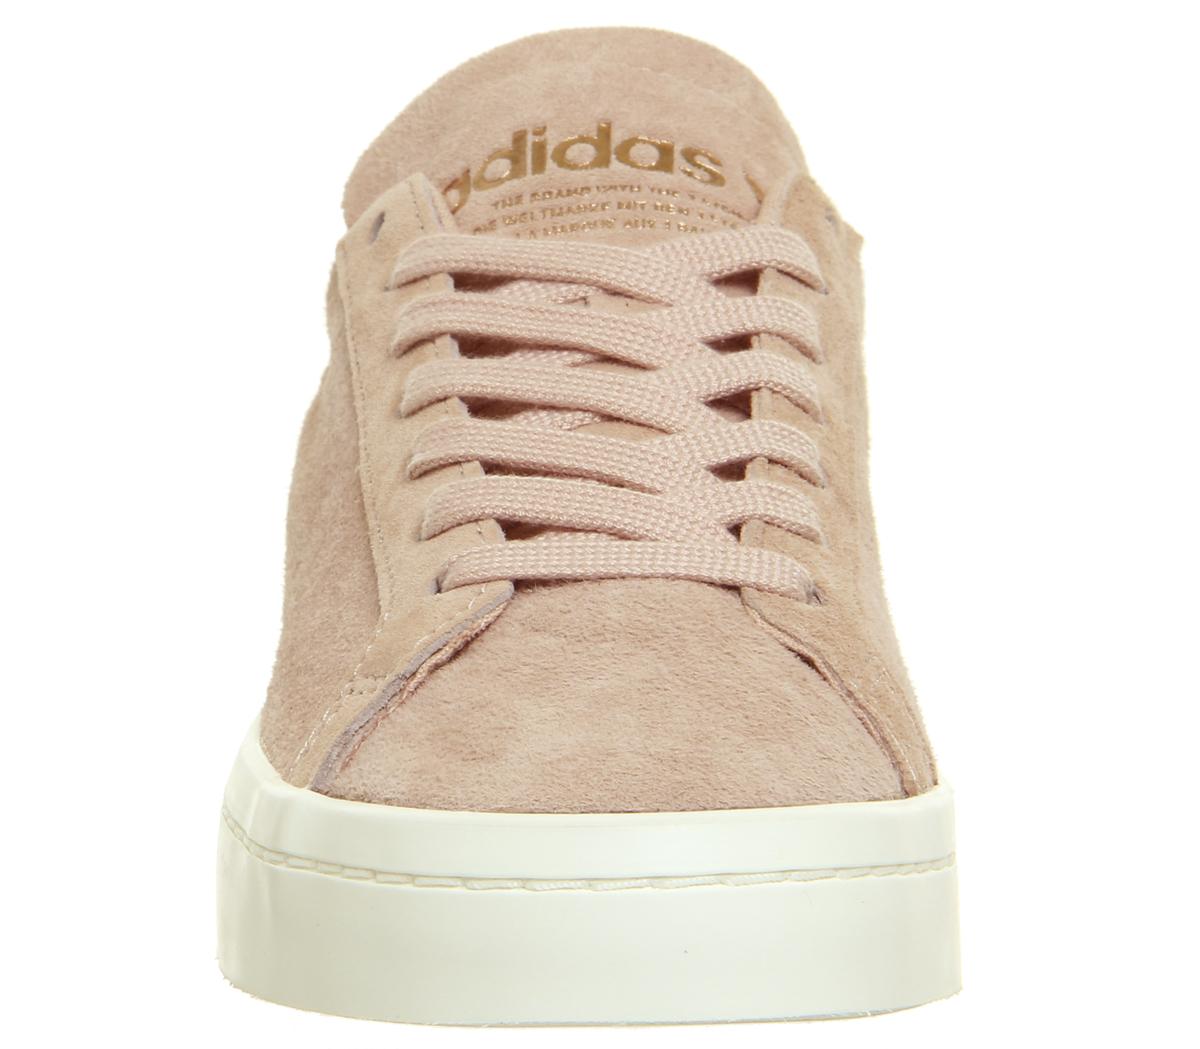 adidas Court Vantage Trainers Vapour Pink Linen - Hers trainers